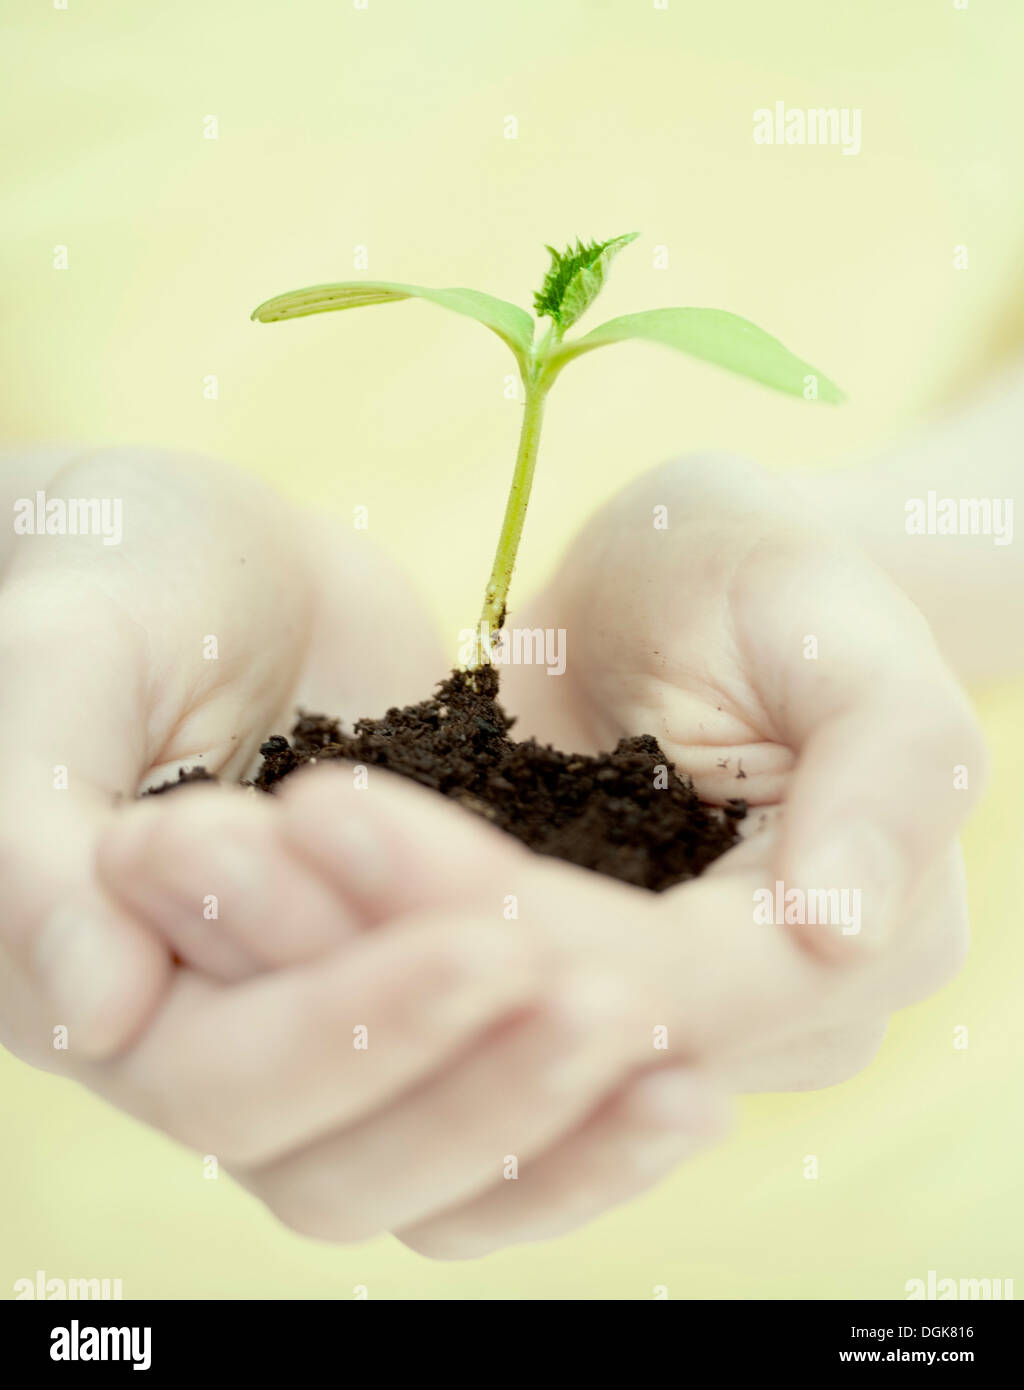 Seedling in cupped hands Stock Photo